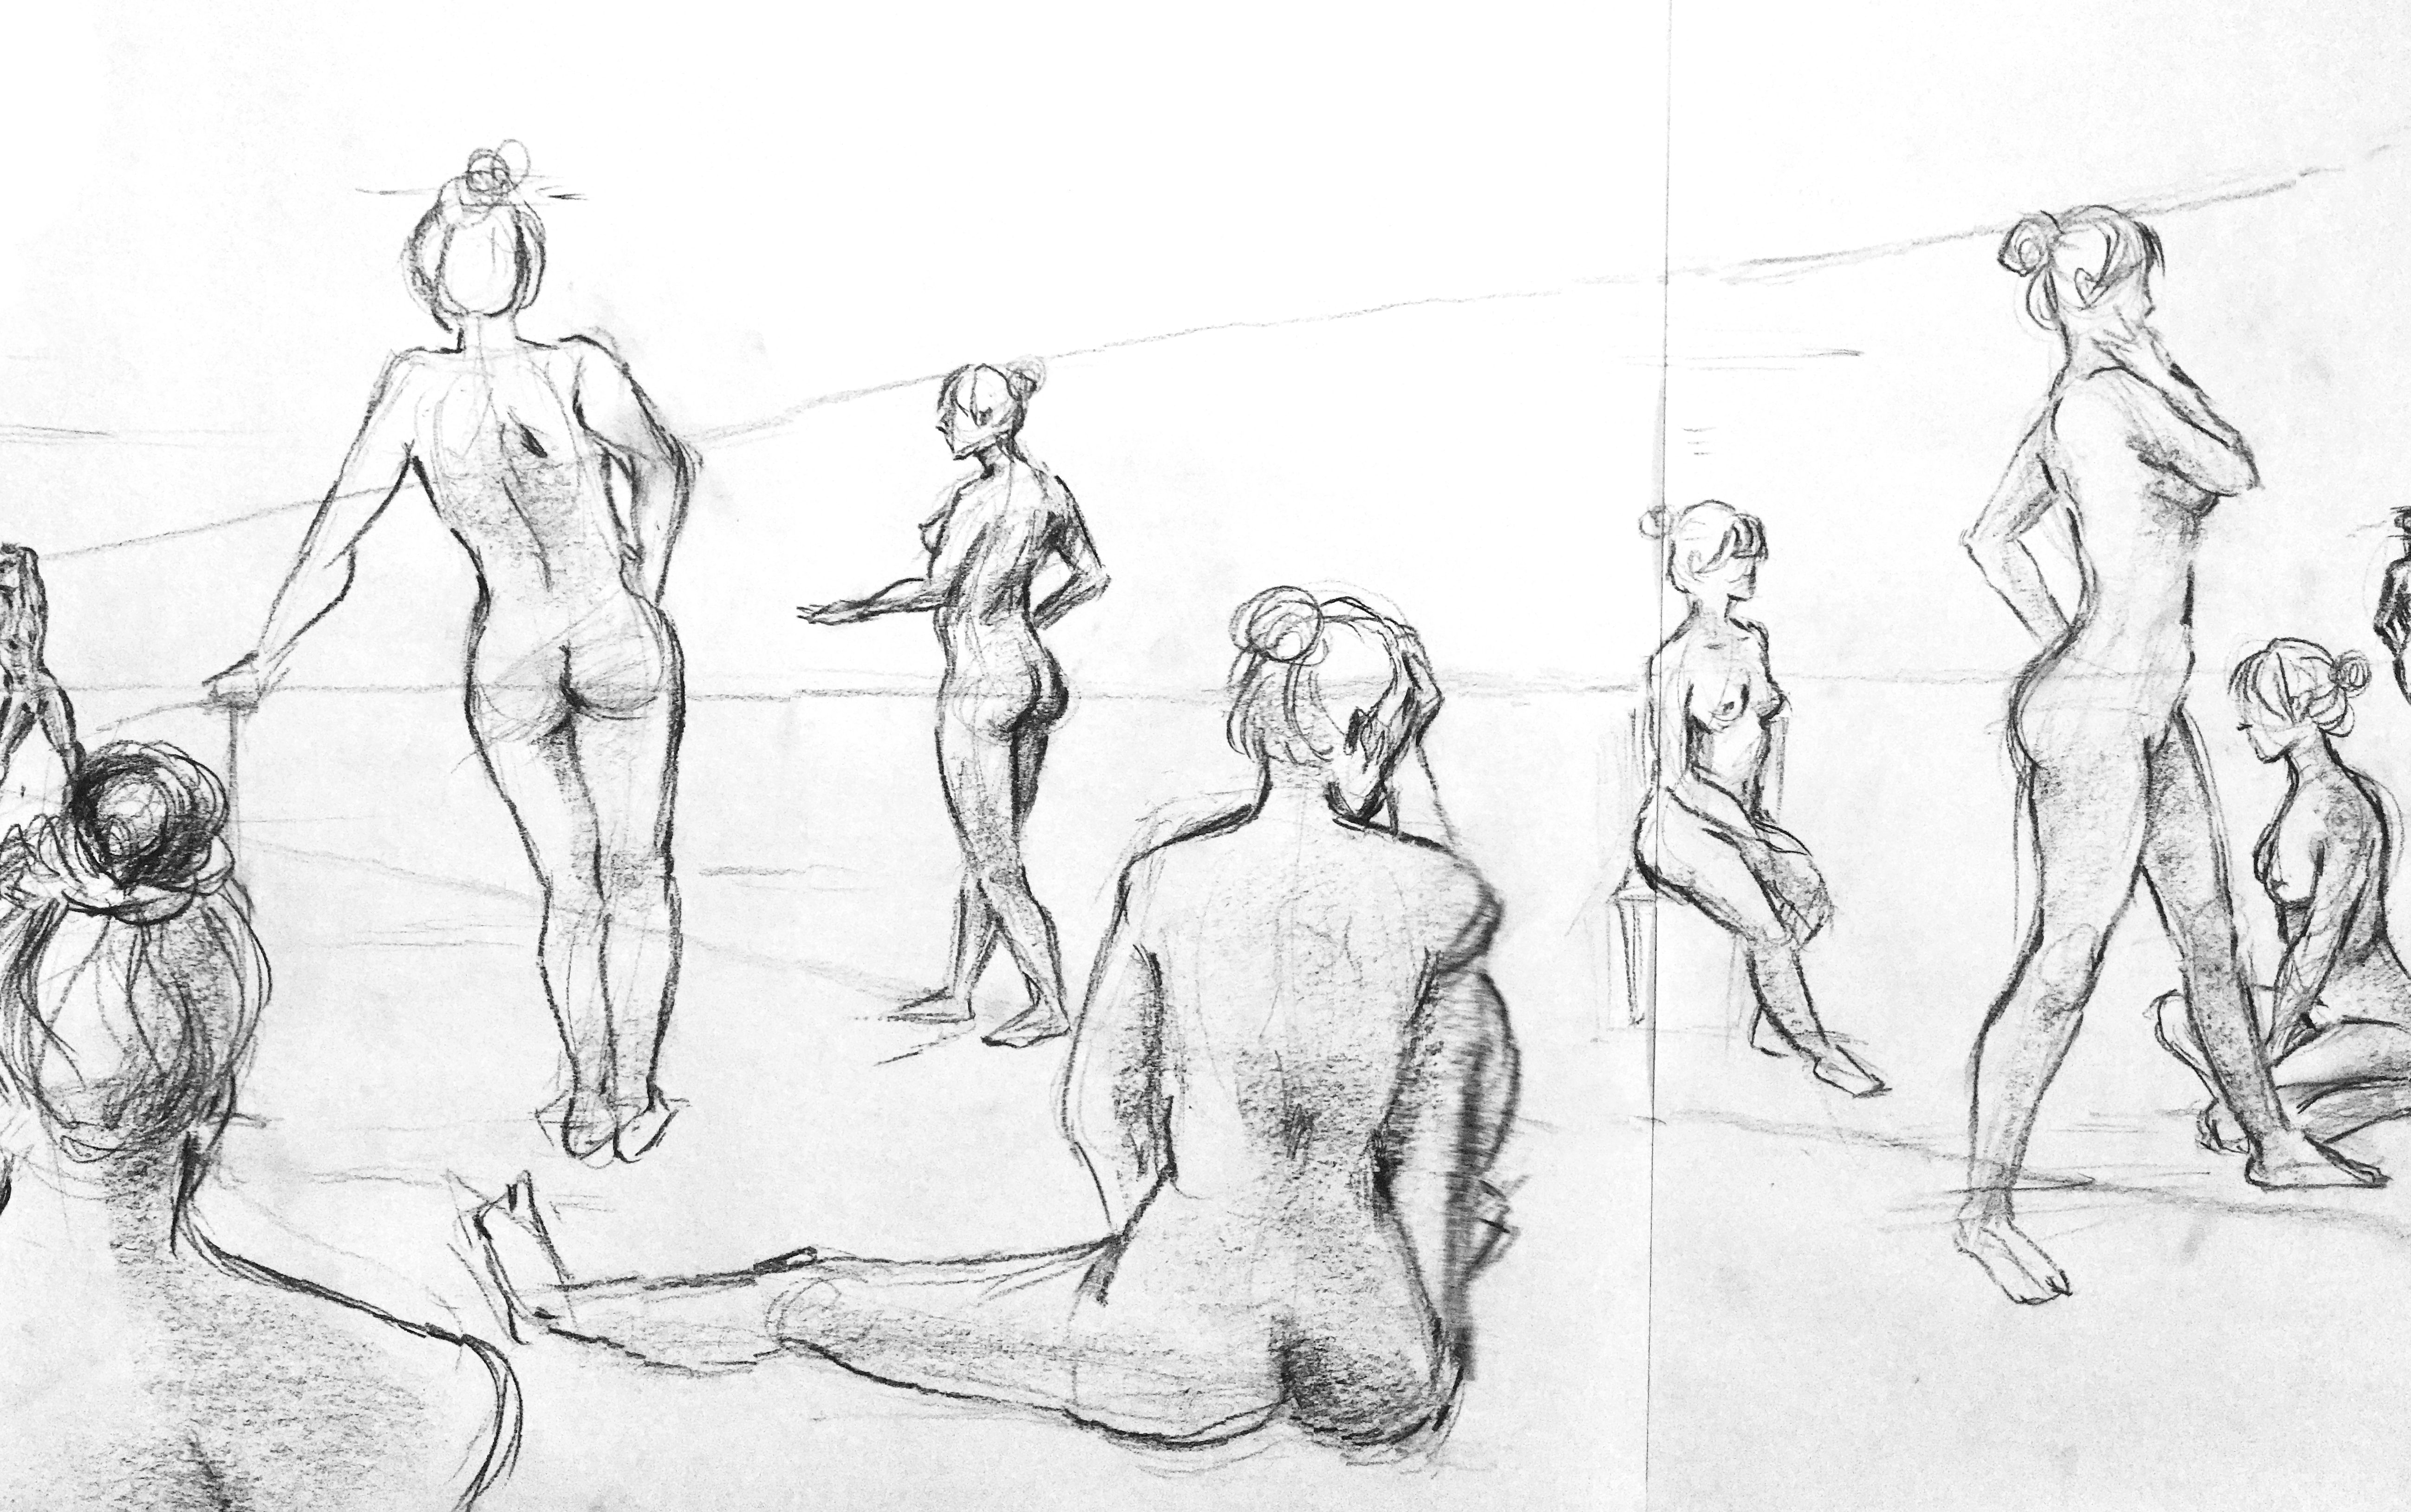 Perspective Study (Part II): Model Study | Drawing & Imaging